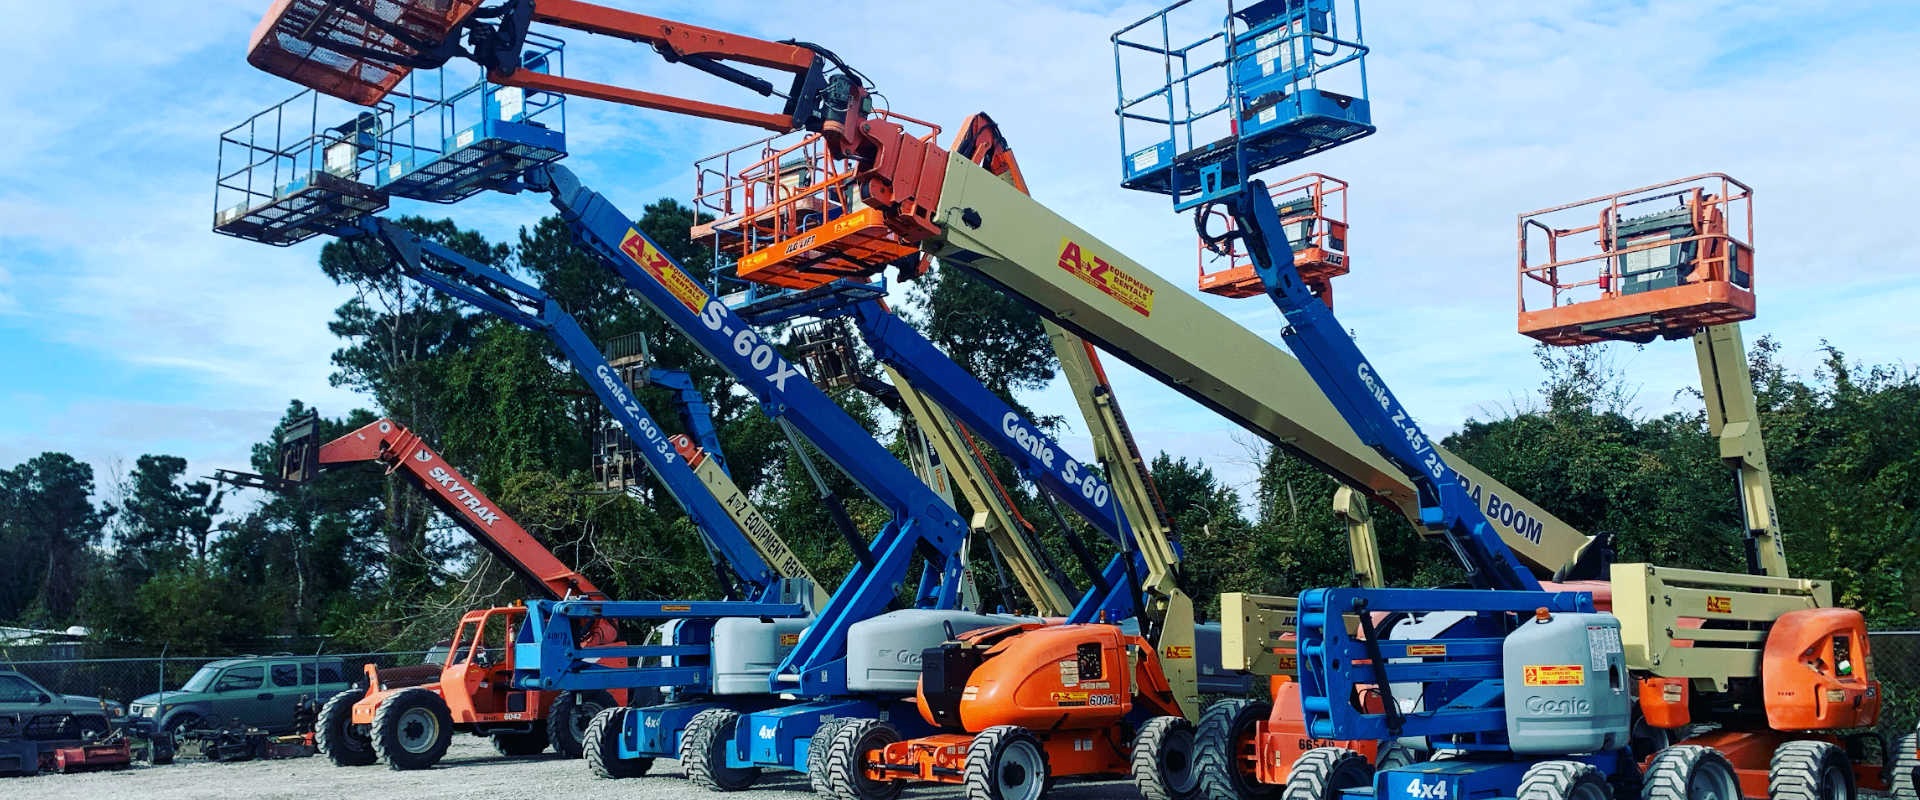 Boom Lift Equipment Rentals in Wilmington, NC and Charleston, SC